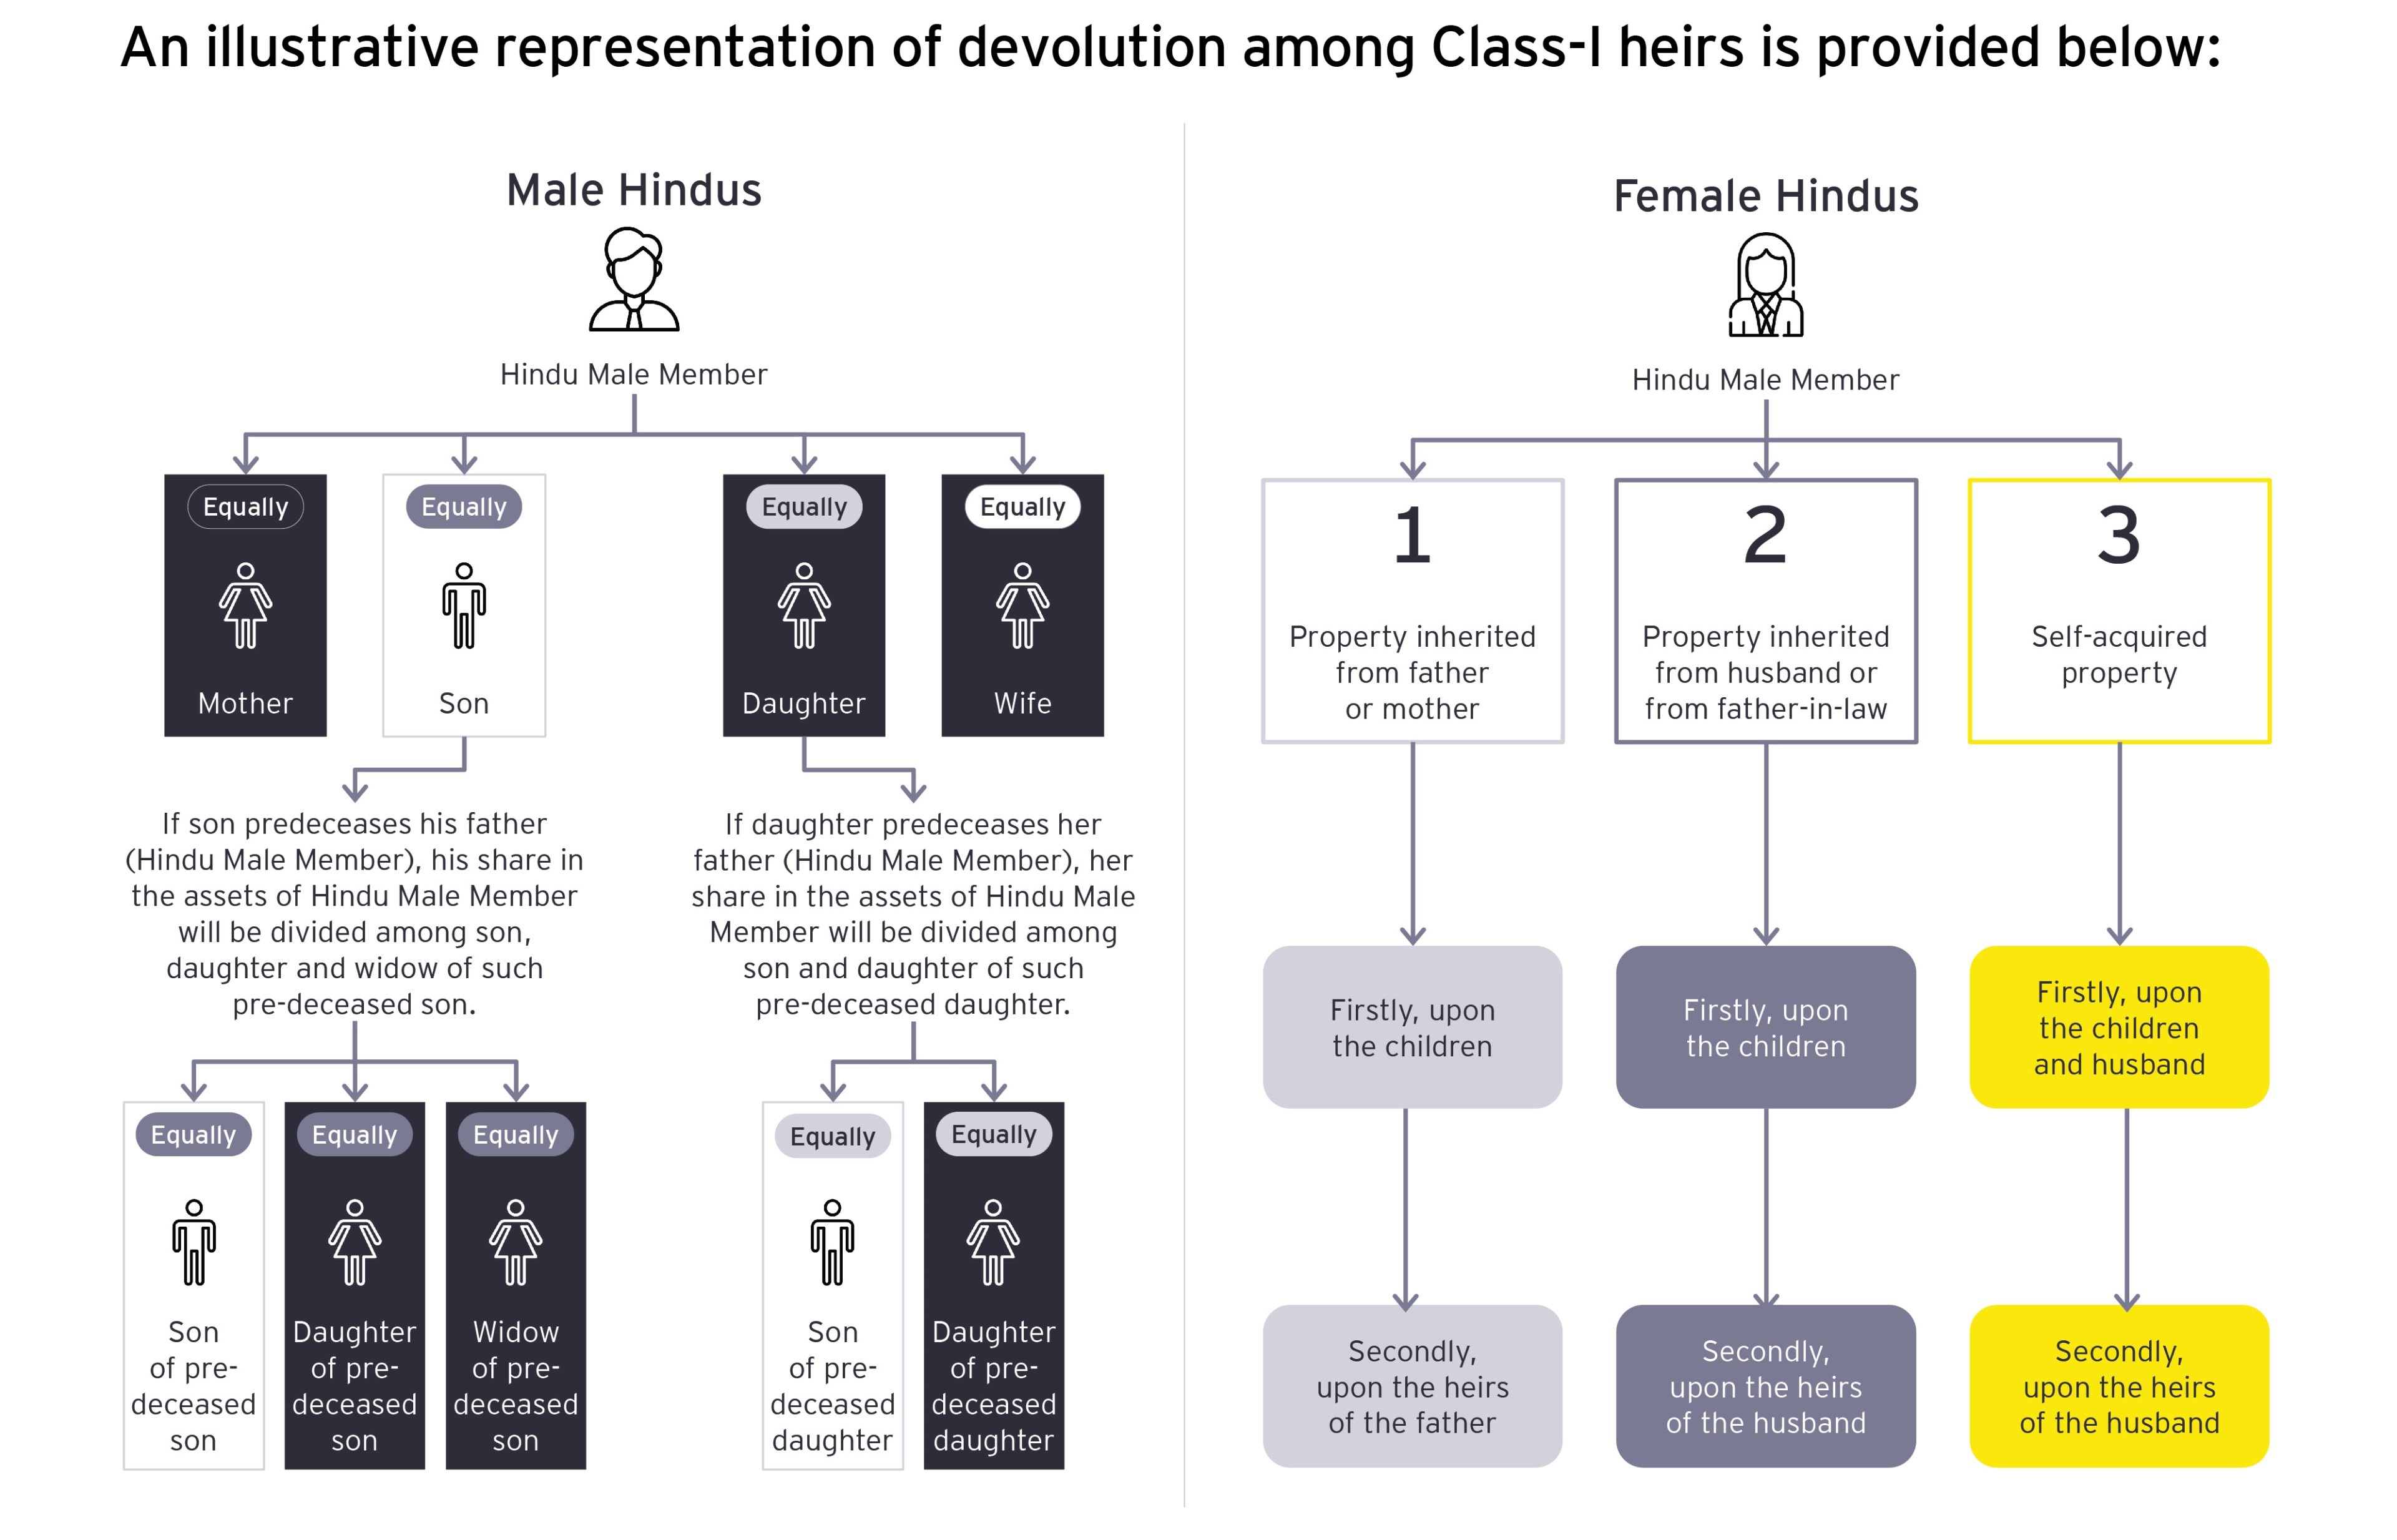 Devolution among male and female hindus Class-I heirs